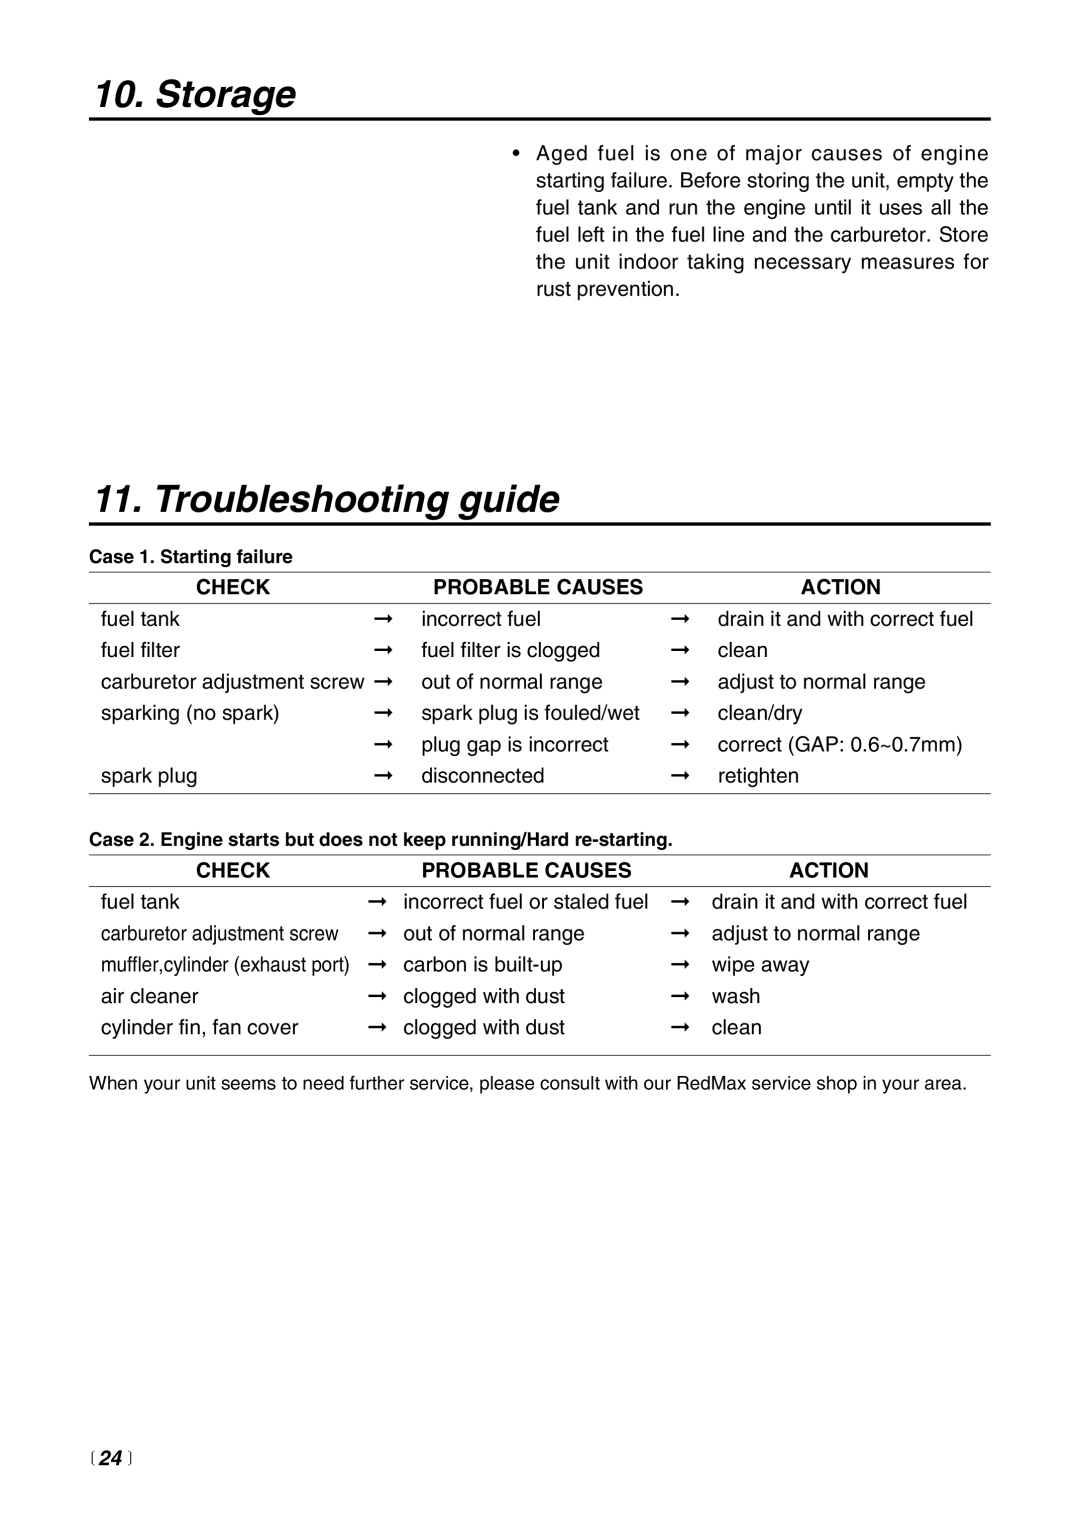 RedMax BT250 manual Storage, Troubleshooting guide,  24  